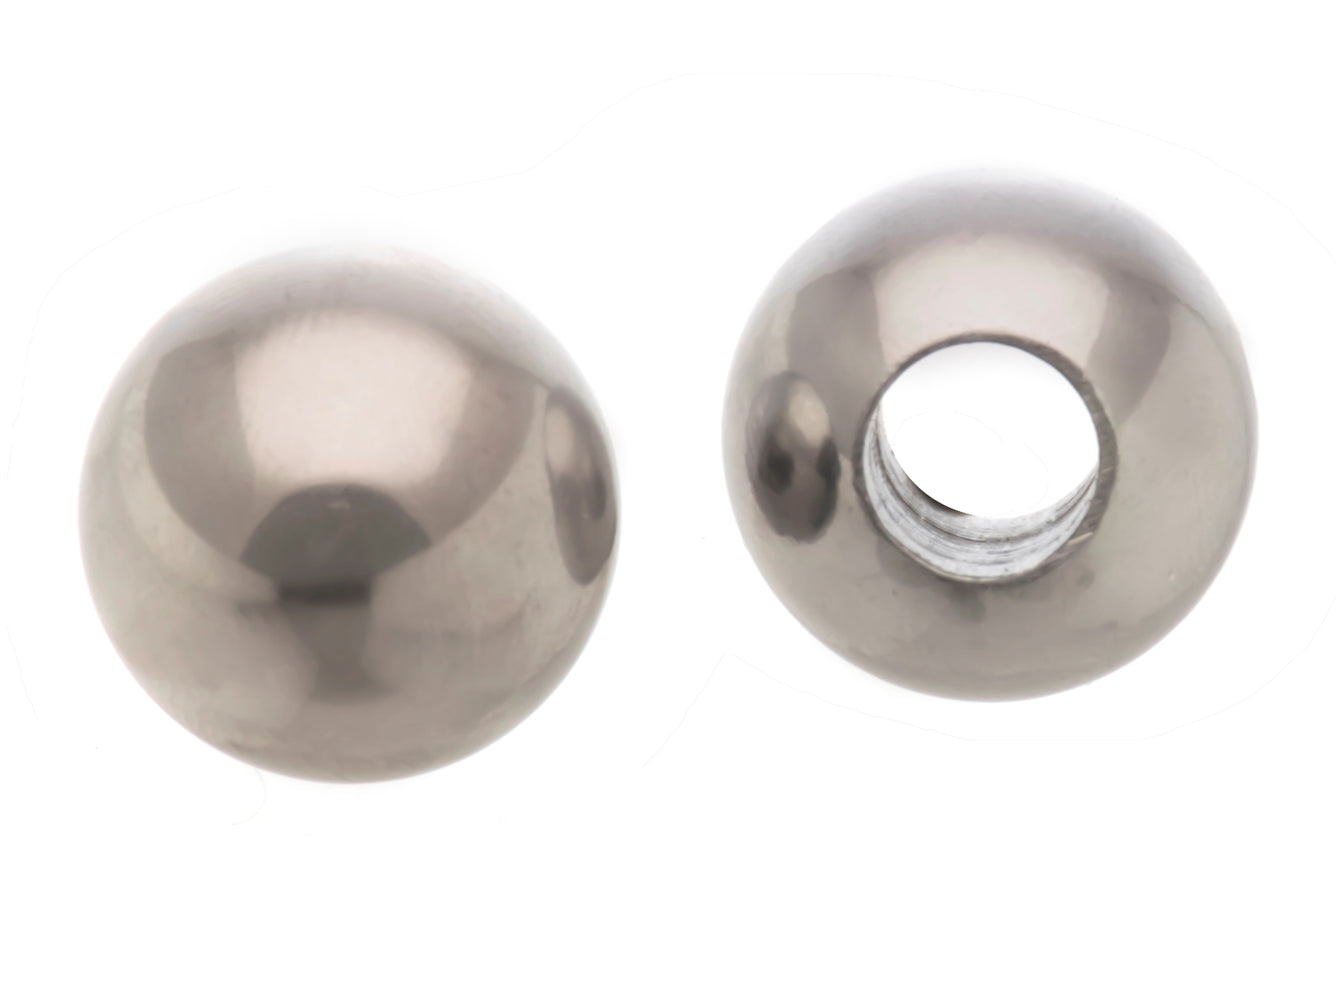 Spare Ball Set for Law of Motion Apparatus, 19mm, Set of 2